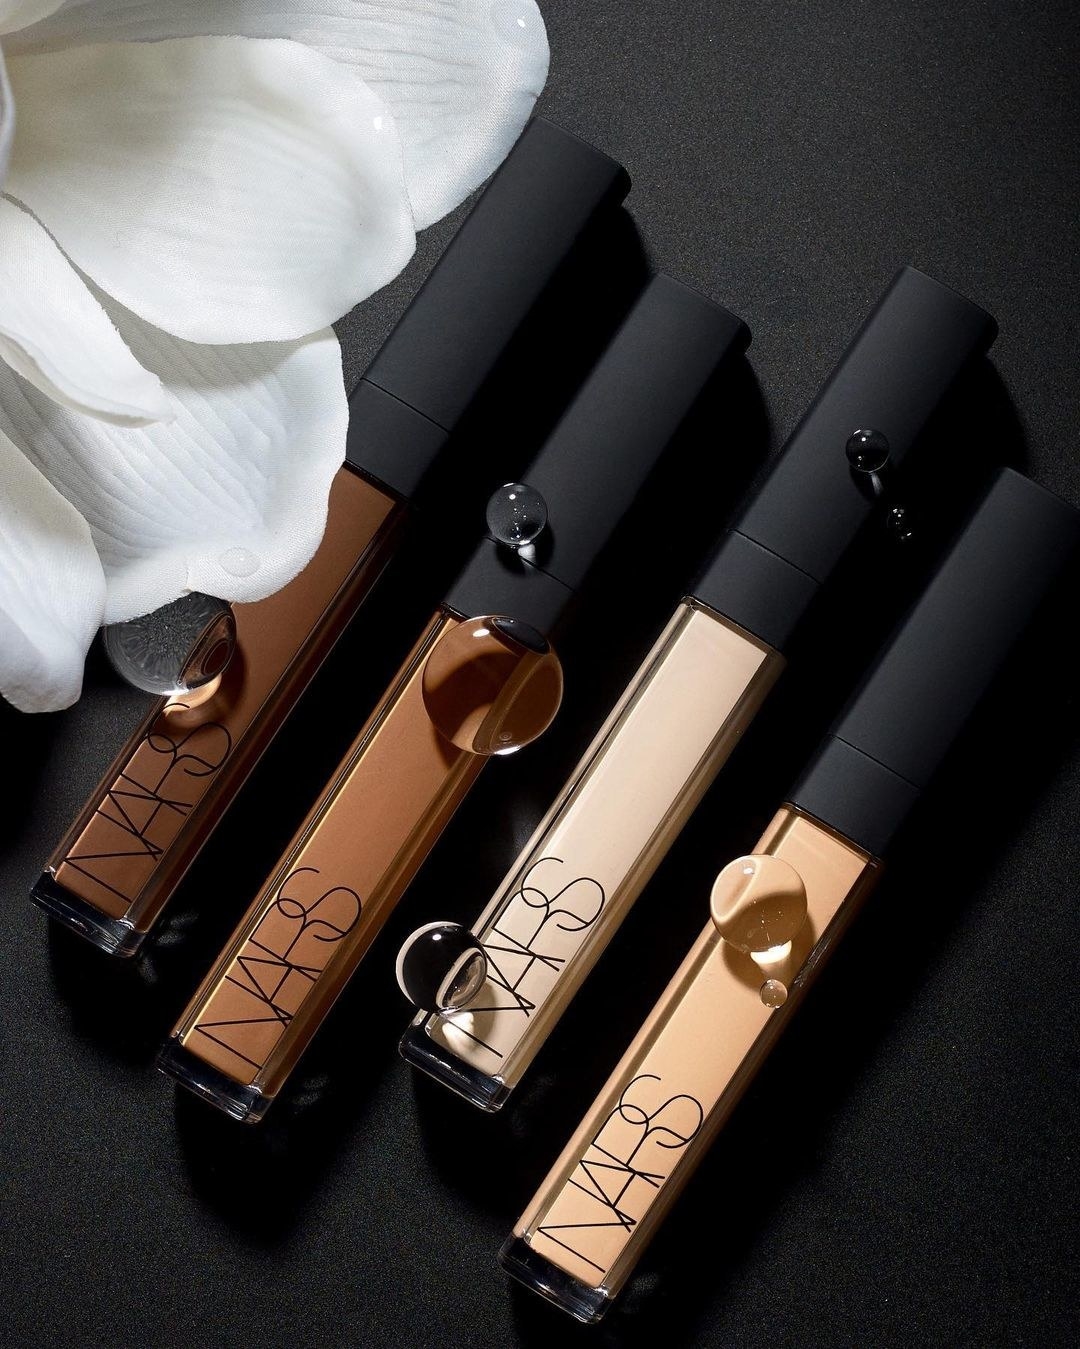 NARS concealer styled on a table in a variety of shades